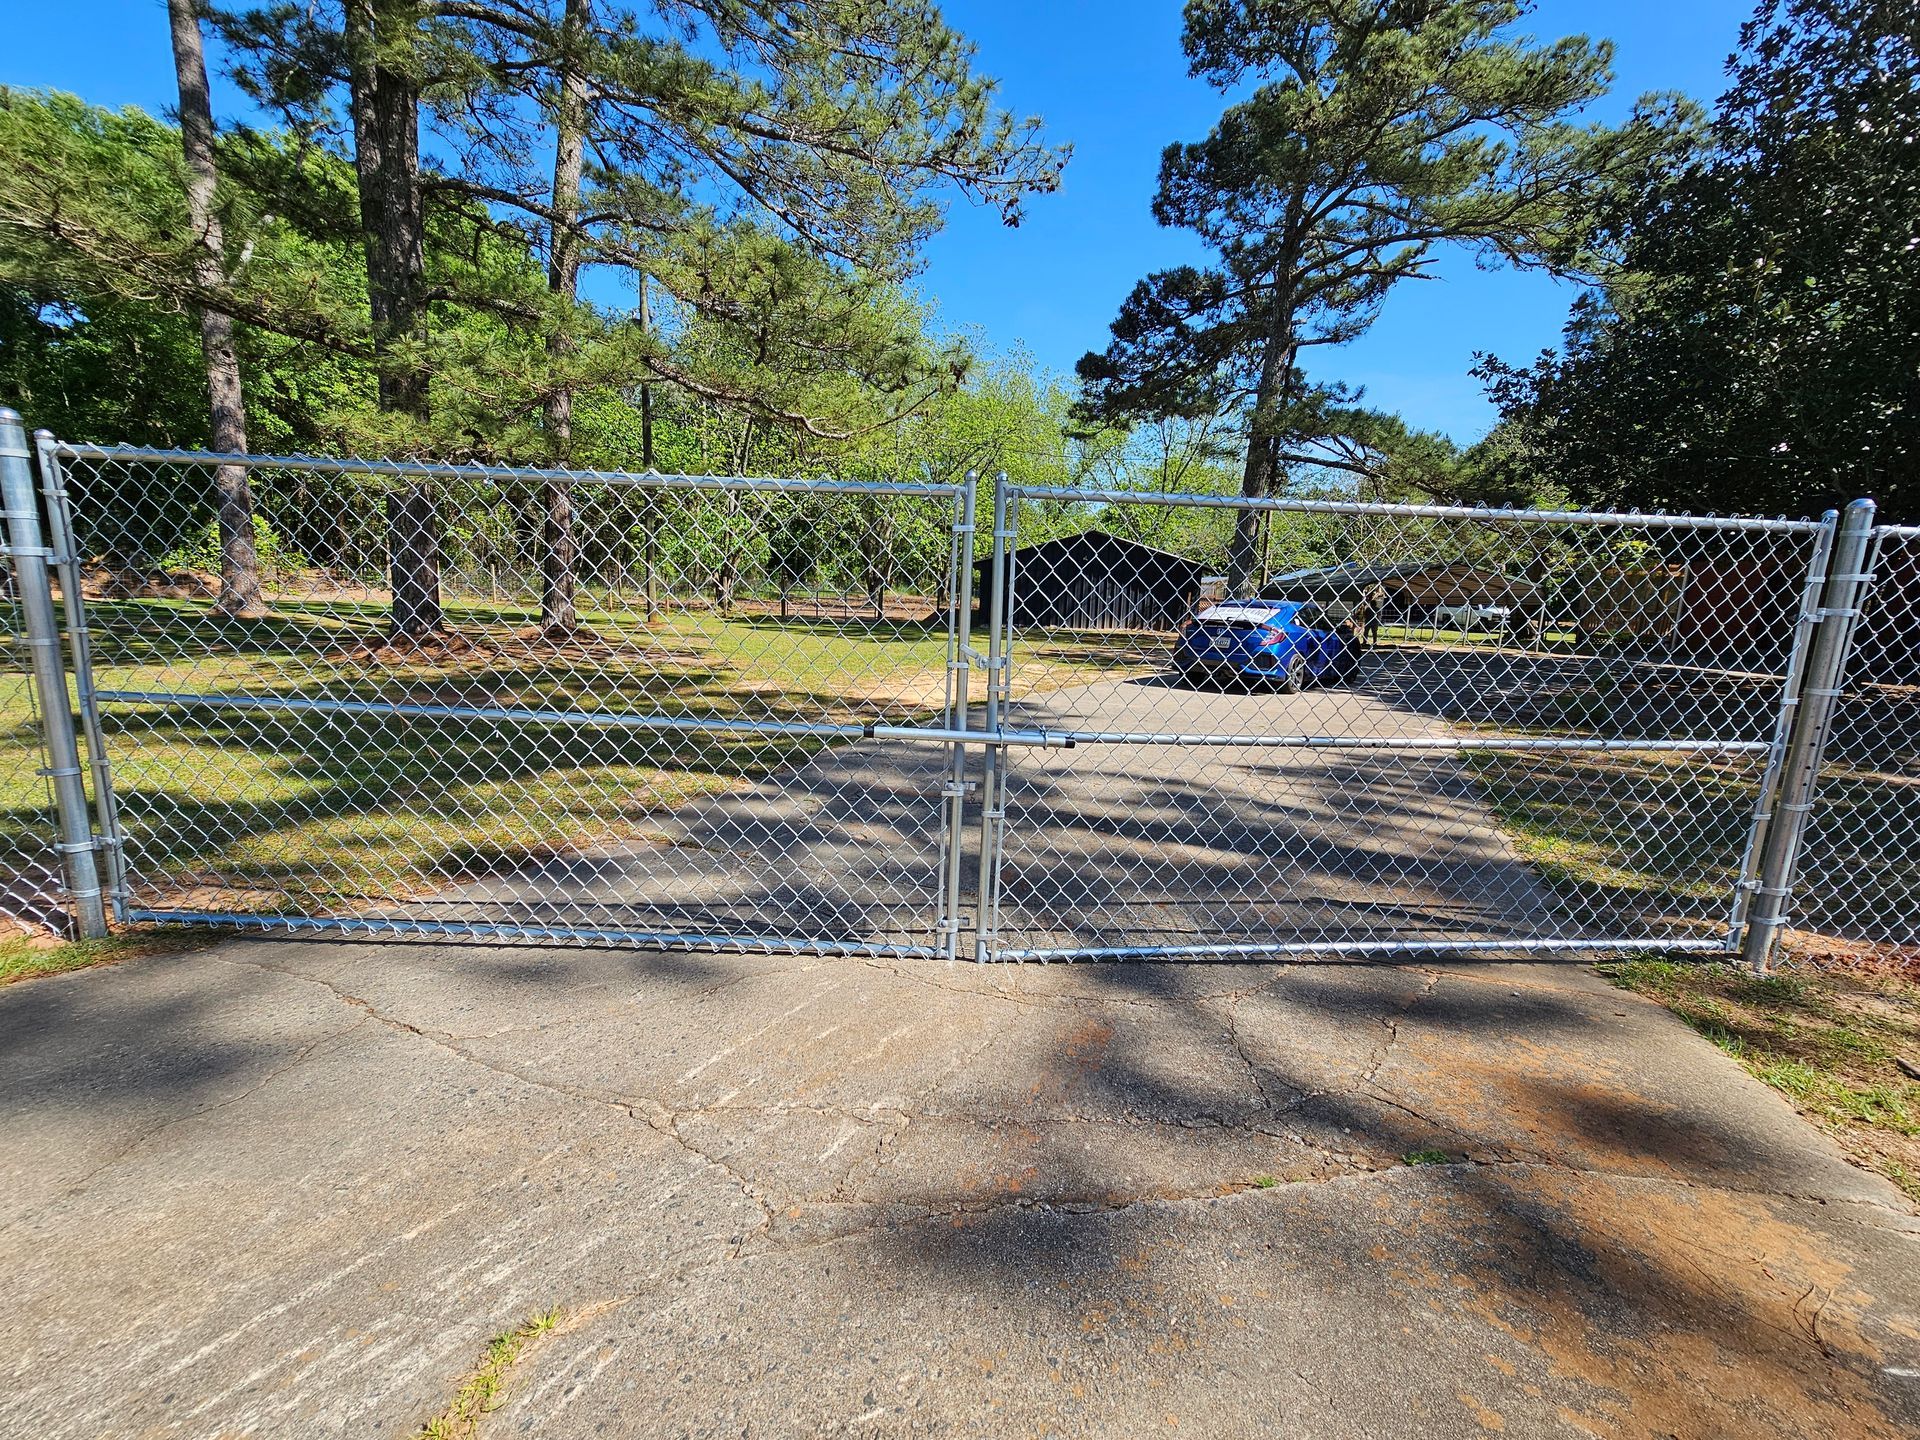 A chain link fence surrounds a driveway with trees in the background.